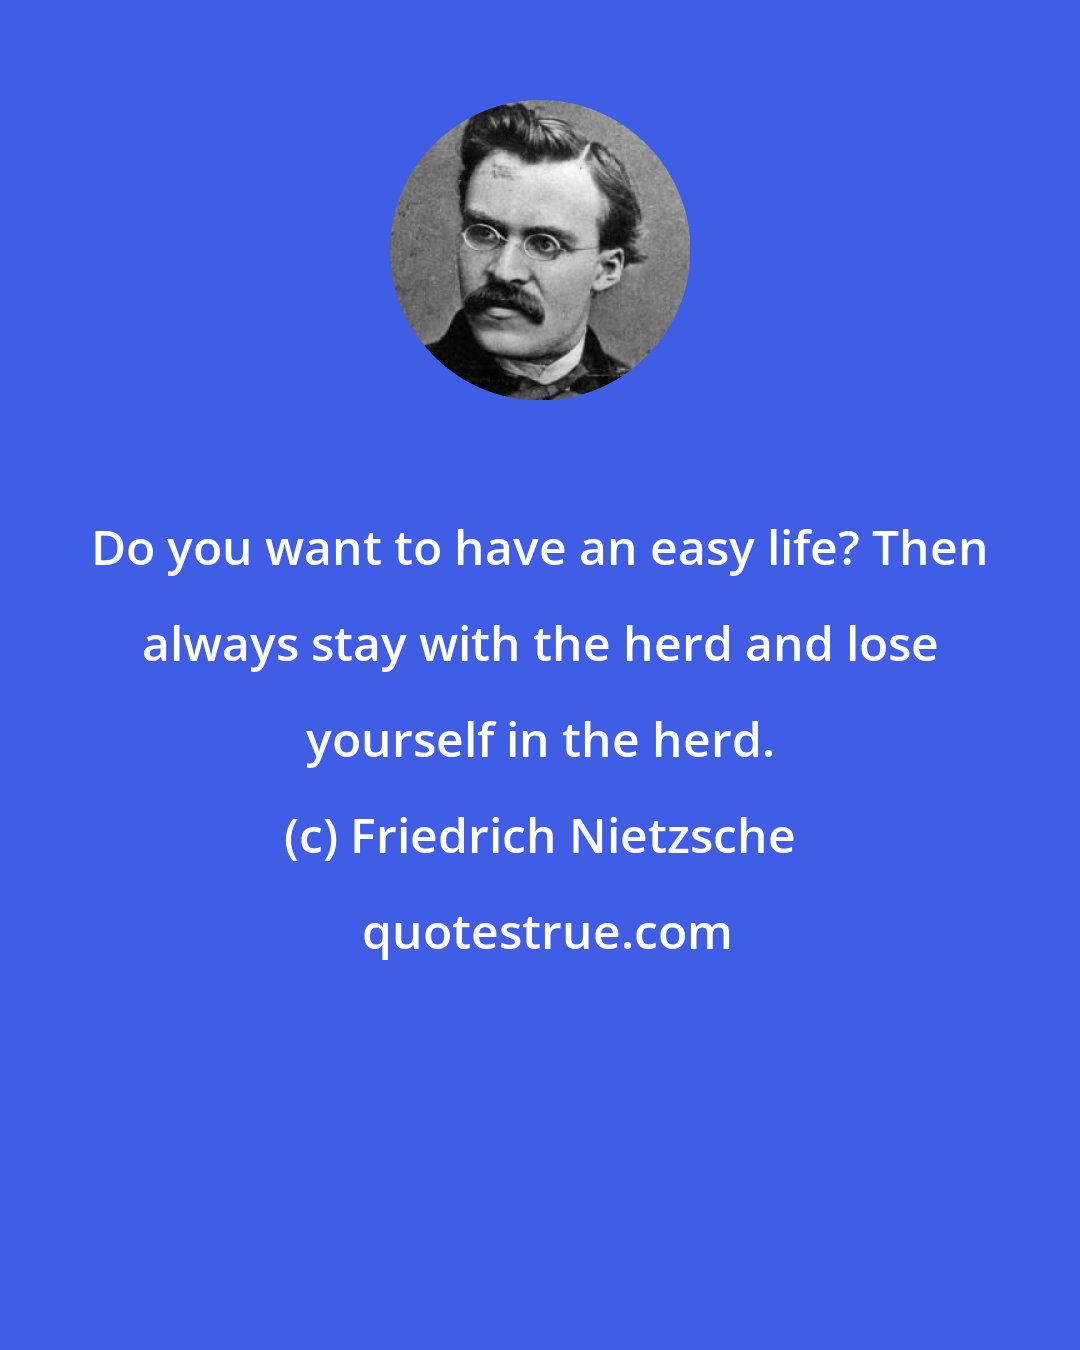 Friedrich Nietzsche: Do you want to have an easy life? Then always stay with the herd and lose yourself in the herd.